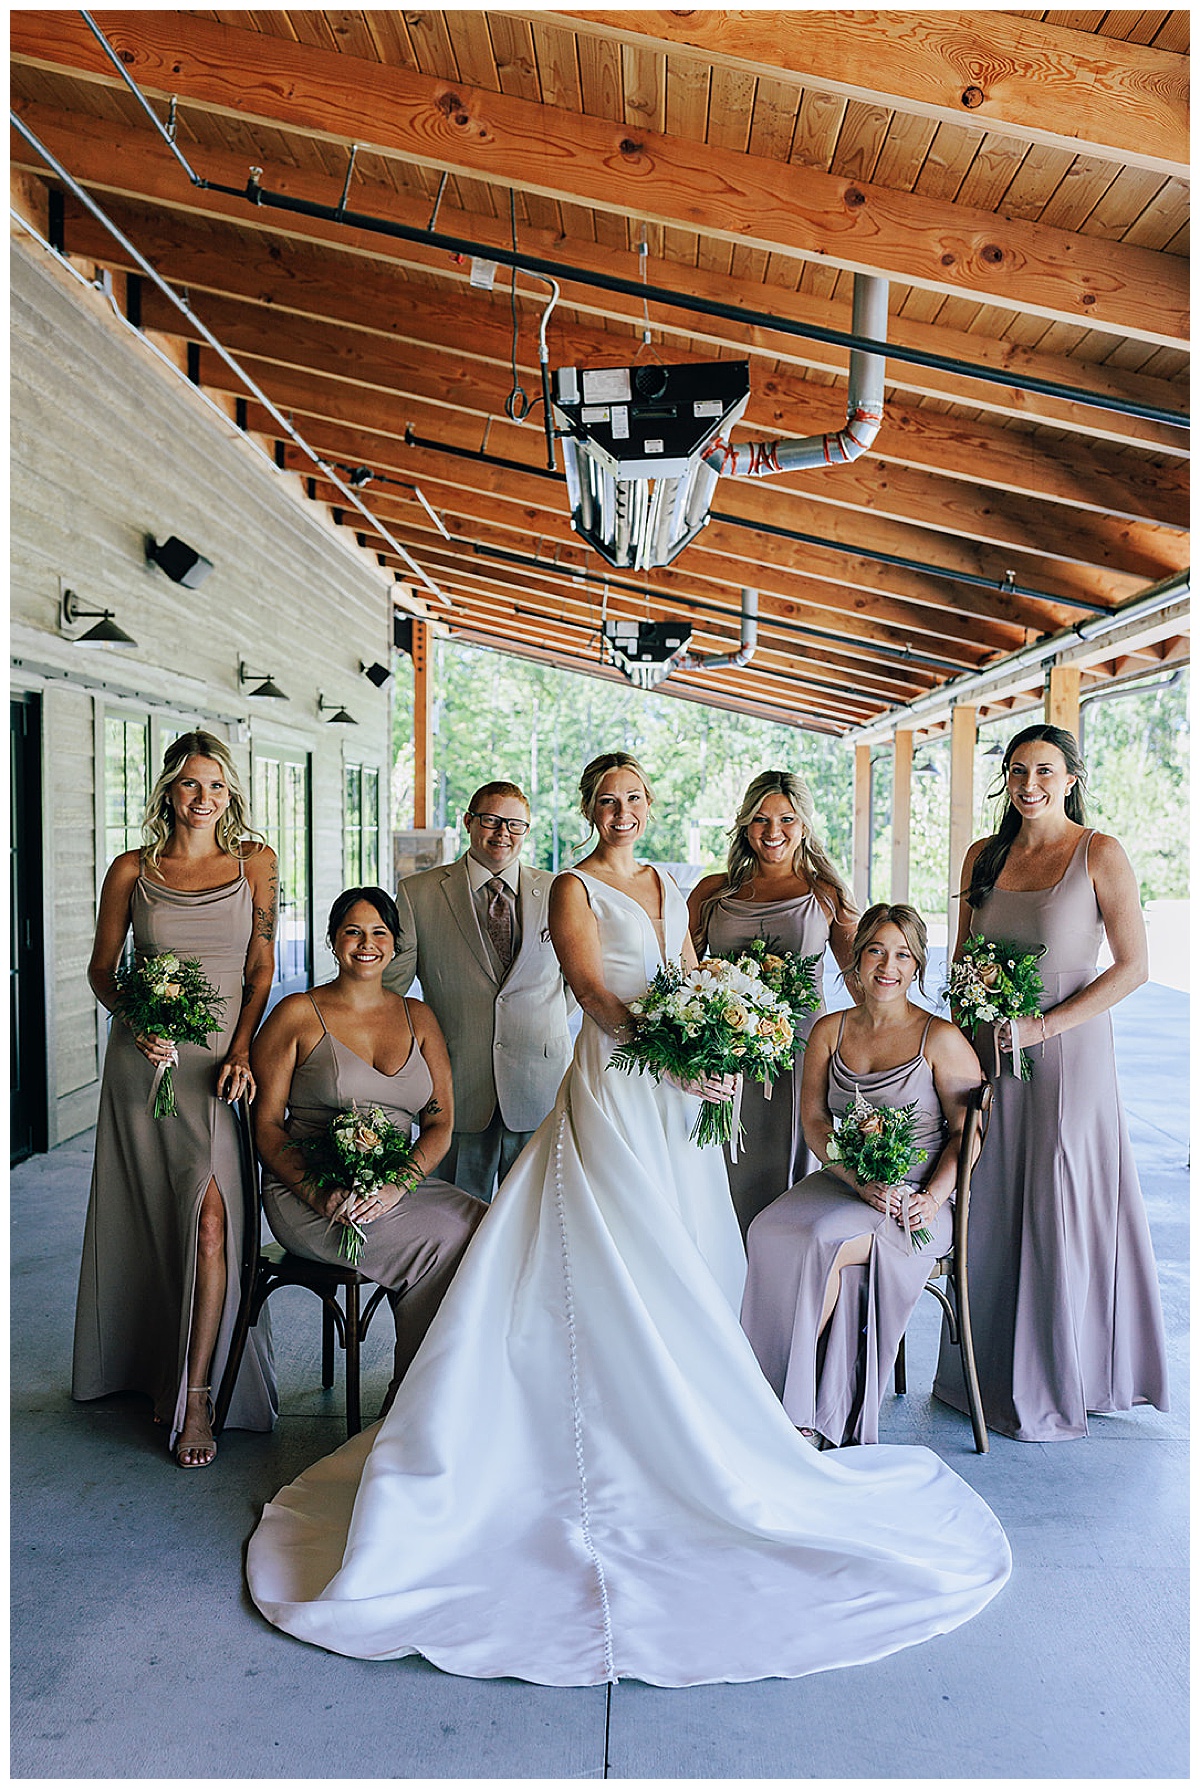 Bride stands in front of wedding party by Kayla Bouren Photography